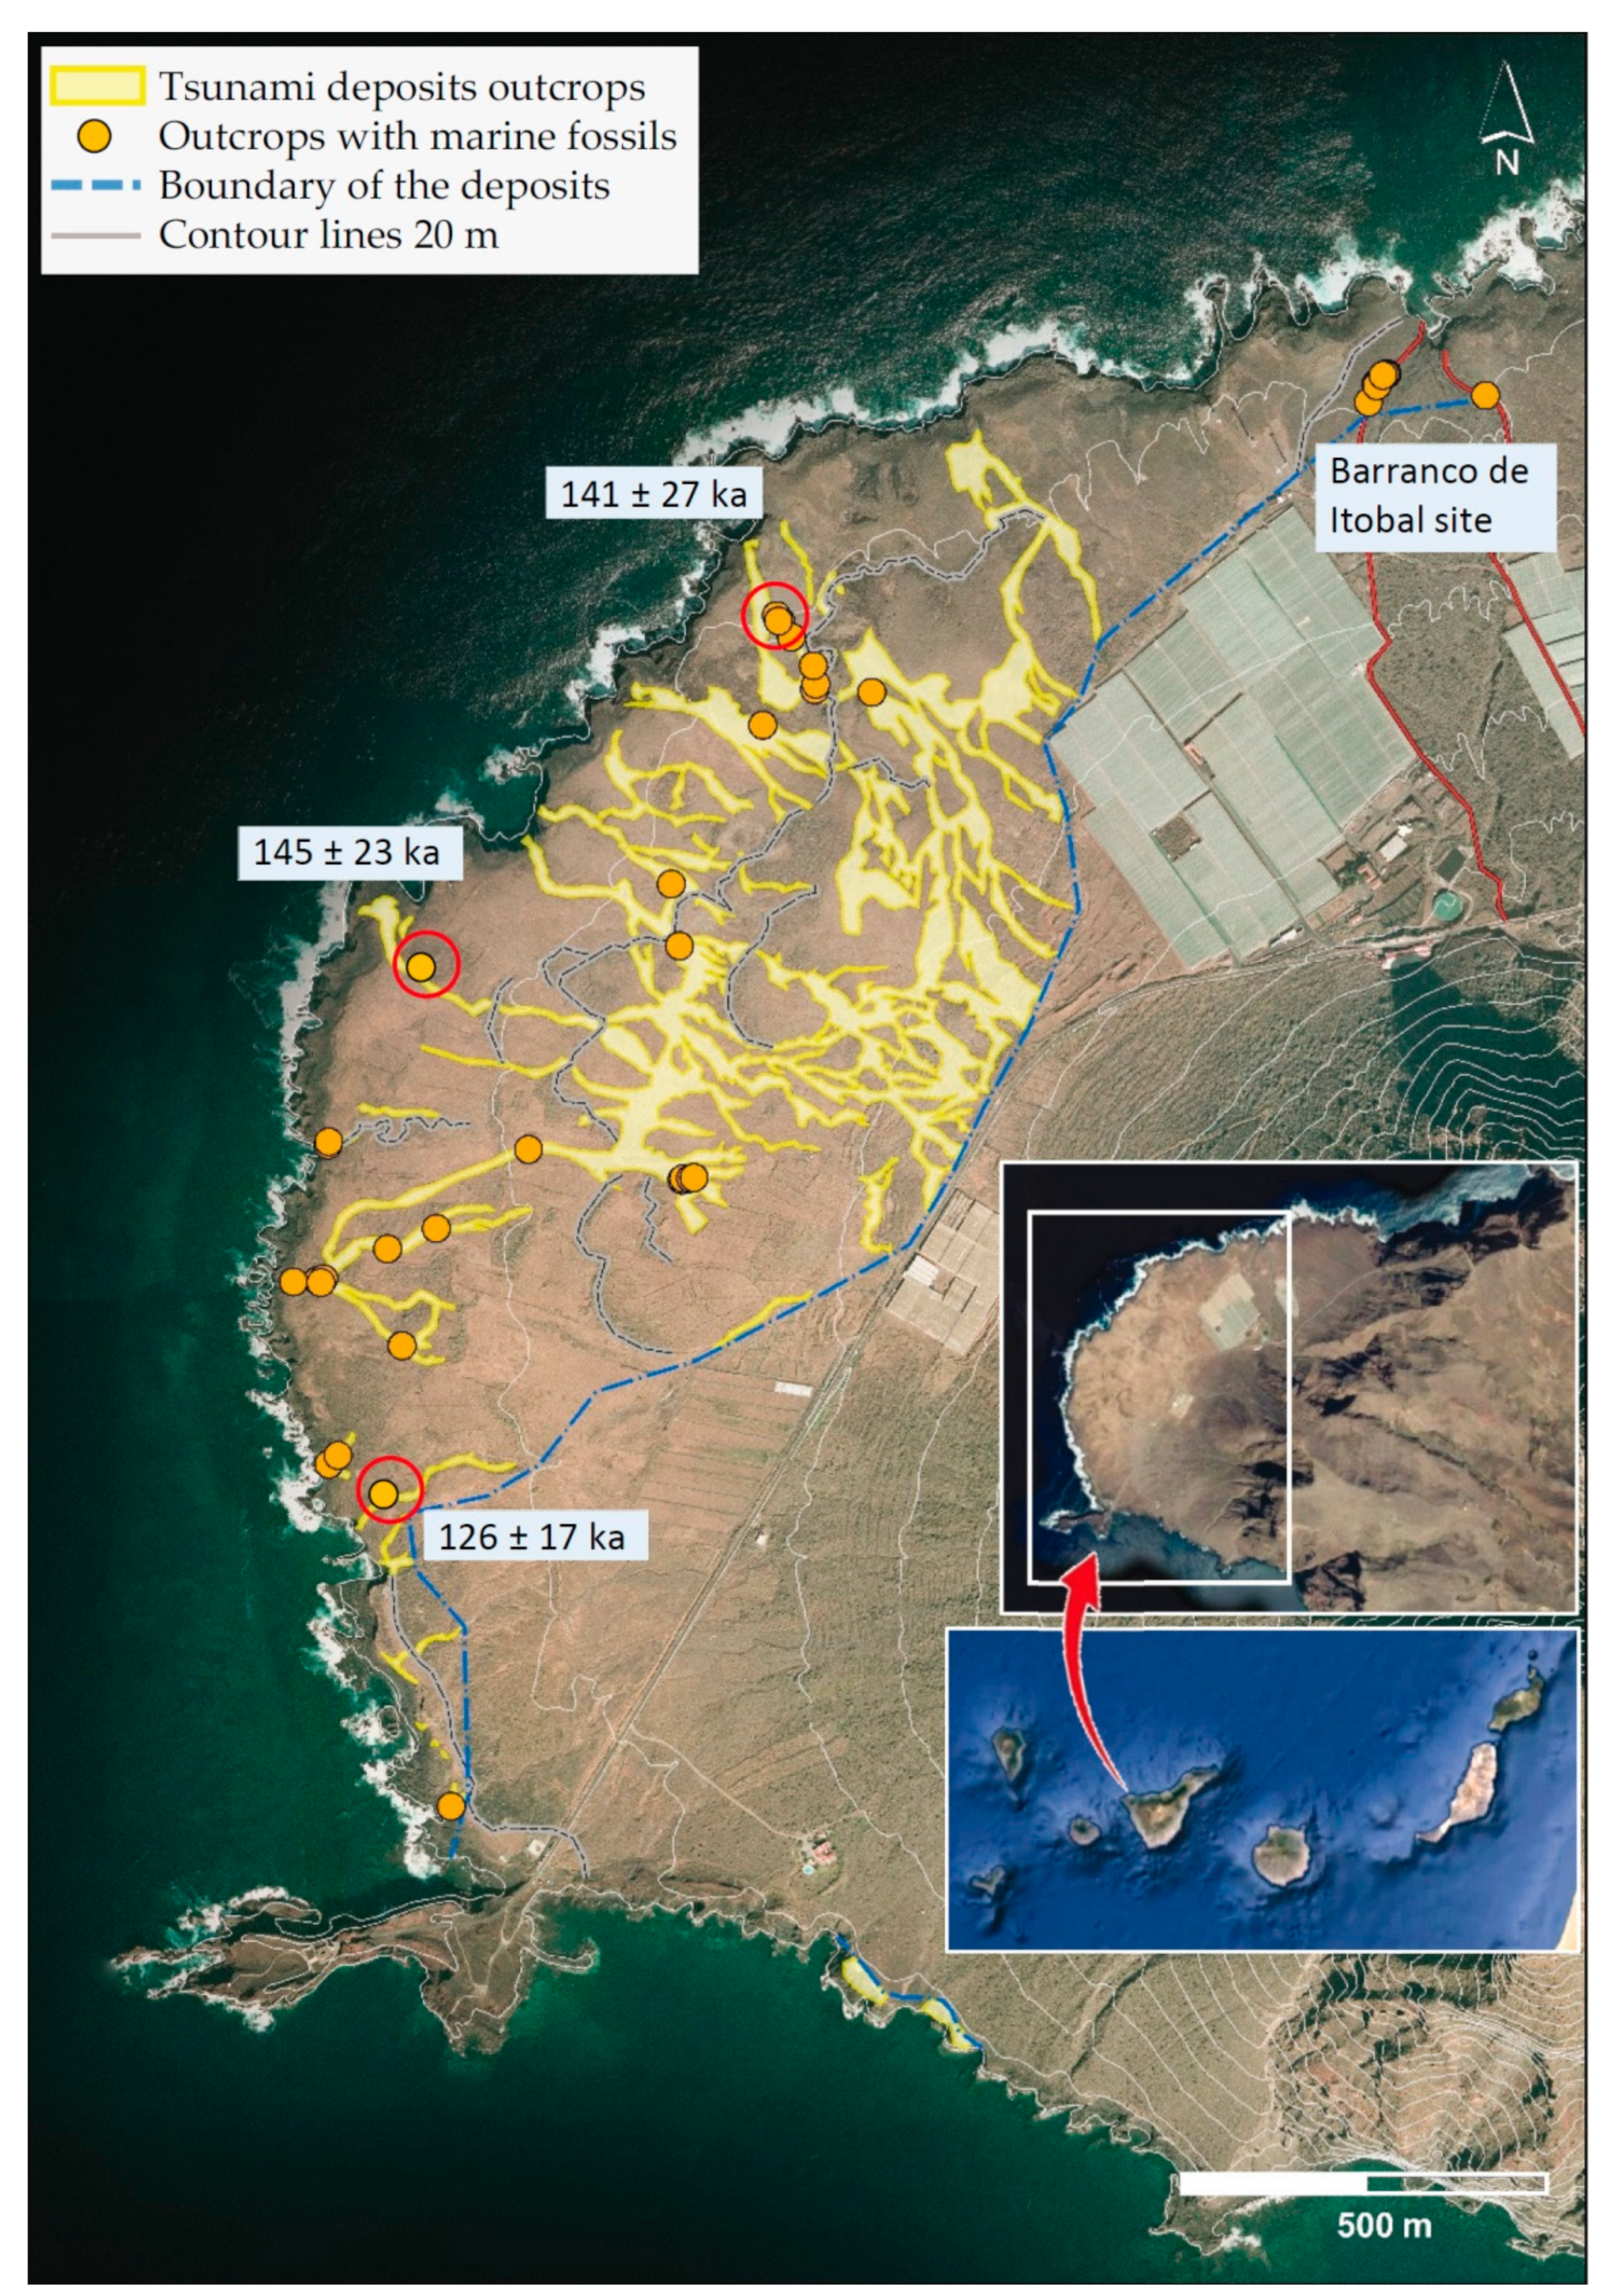 GeoHazards | Free Full-Text | Megatsunamis Induced by Volcanic Landslides  in the Canary Islands: Age of the Tsunami Deposits and Source Landslides